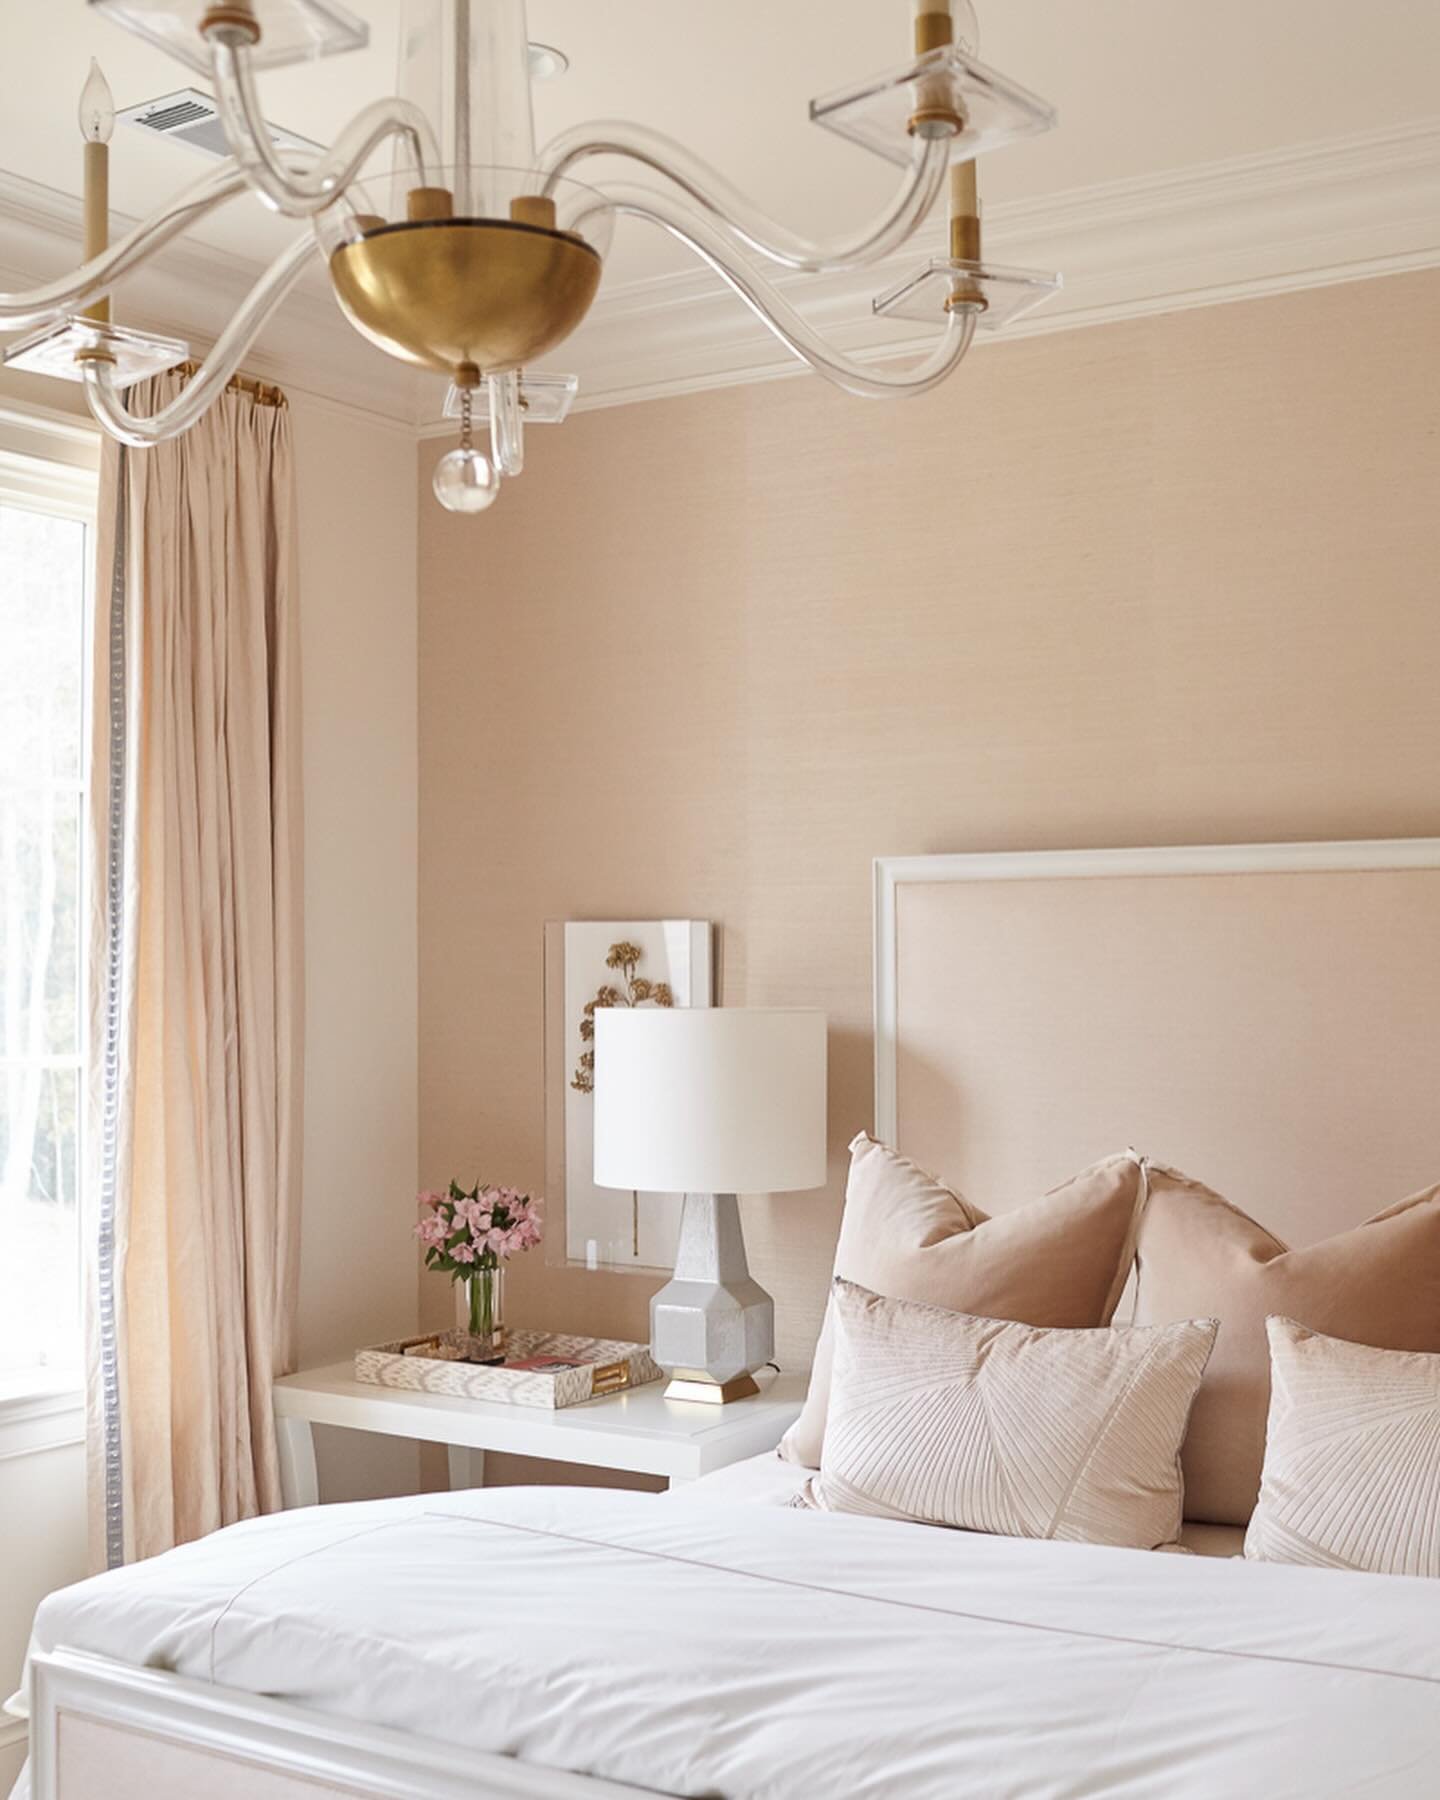 Mostly blush, with small pops of bashful 💕

Beautiful bedroom design by our owner and lead designer @lpdesignlove